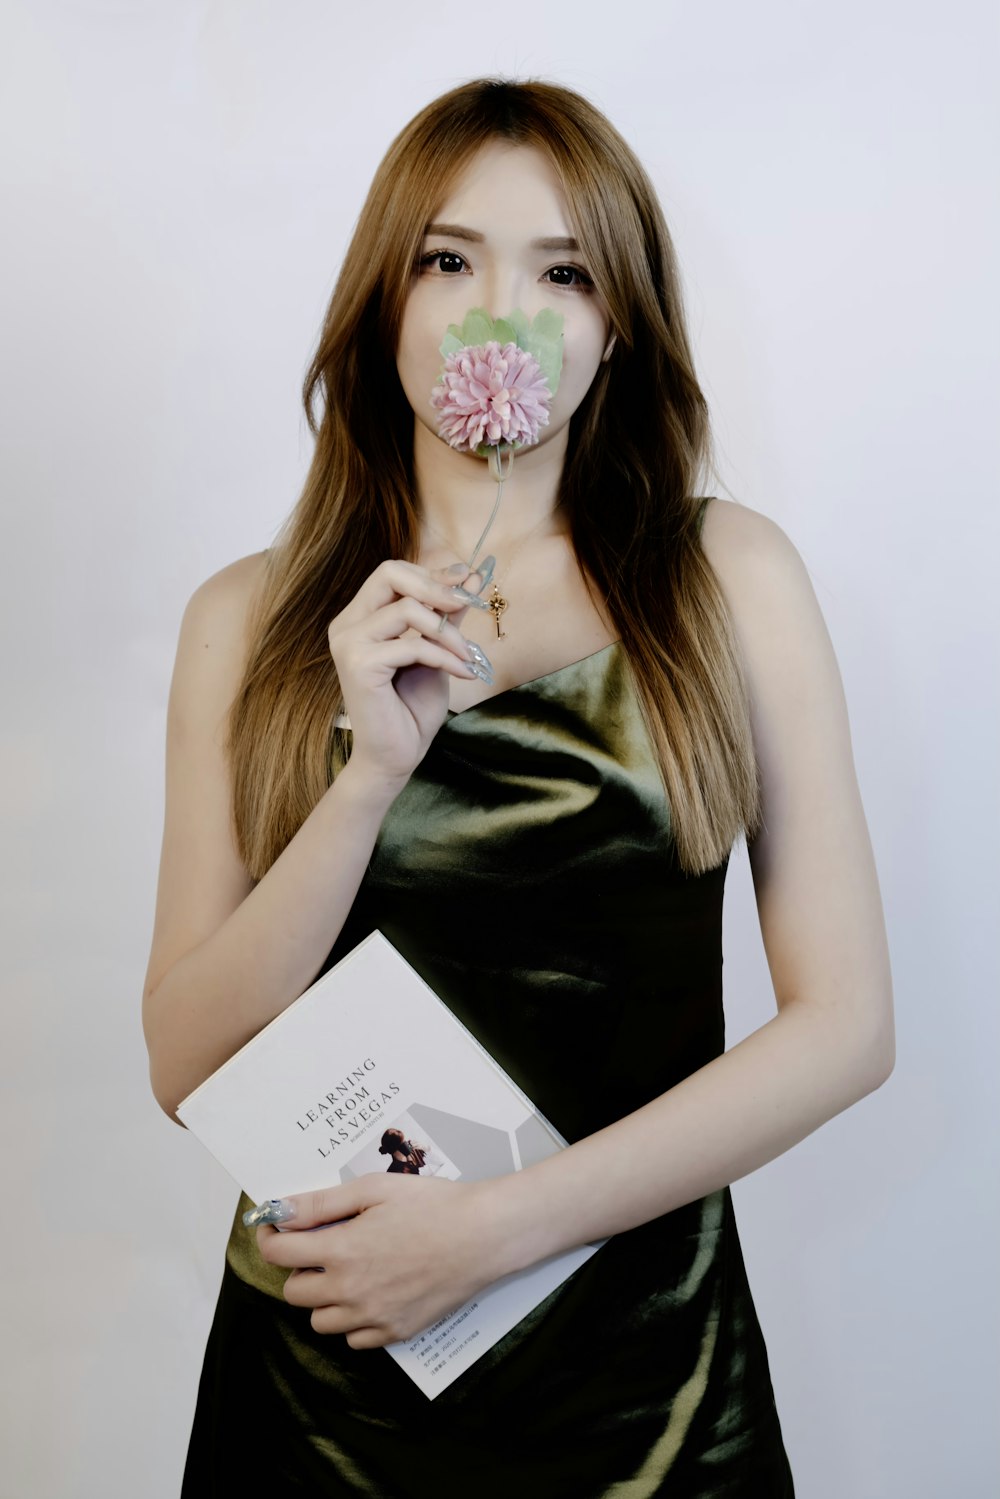 a woman holding a book and a flower in her mouth